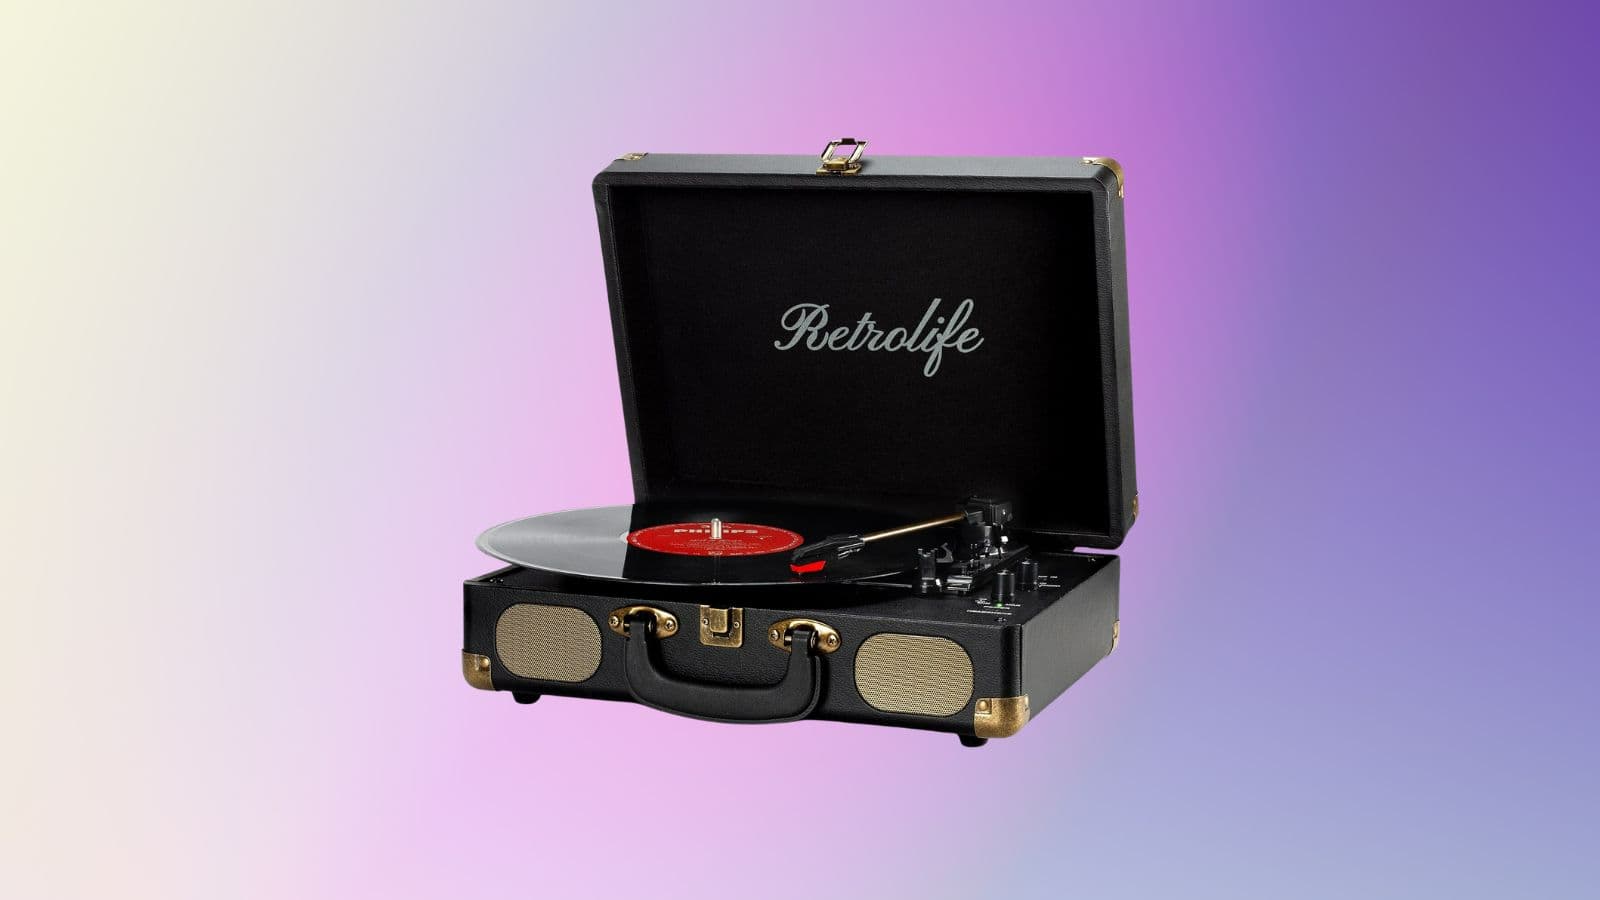 Enjoy vinyl at the best price with this turntable at an unbeatable price.